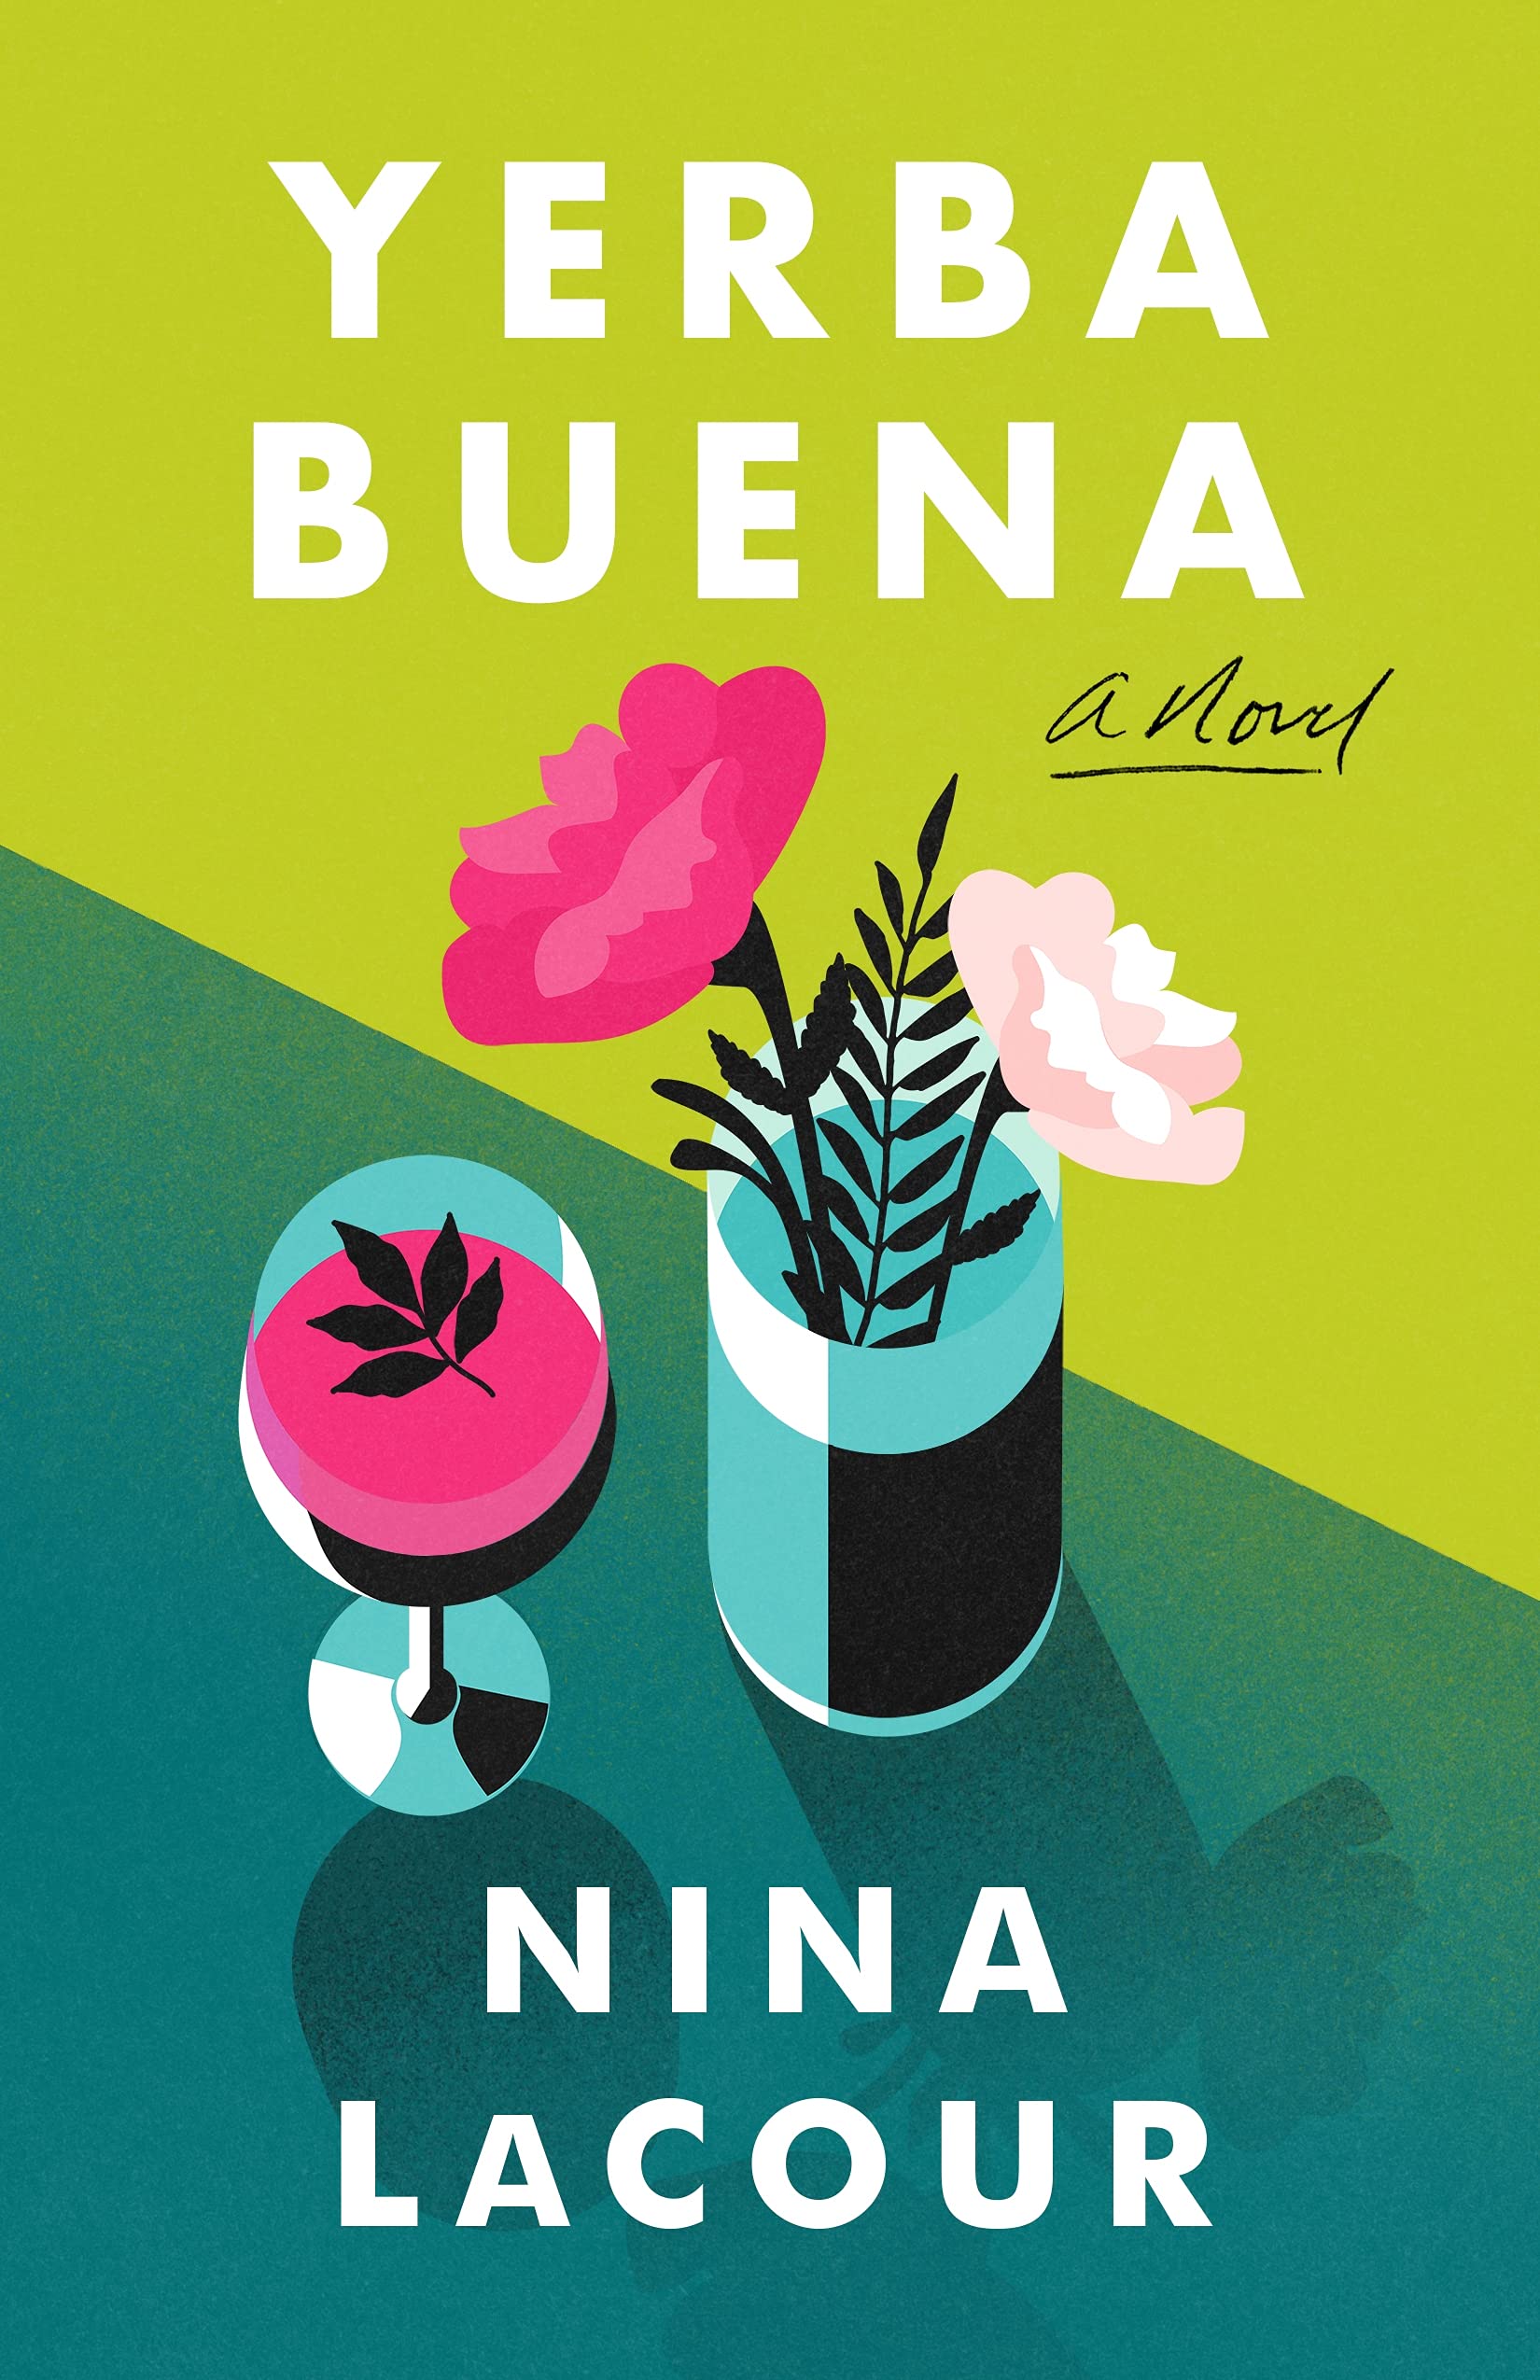 book cover of Yerba Buena. The title and author's named are in bold white text. The background is split between chartreuse on top, and a dark blue-green on bottom. In the middle there is an illustration of pink flowers in a vase next to glass with a pink beverage.